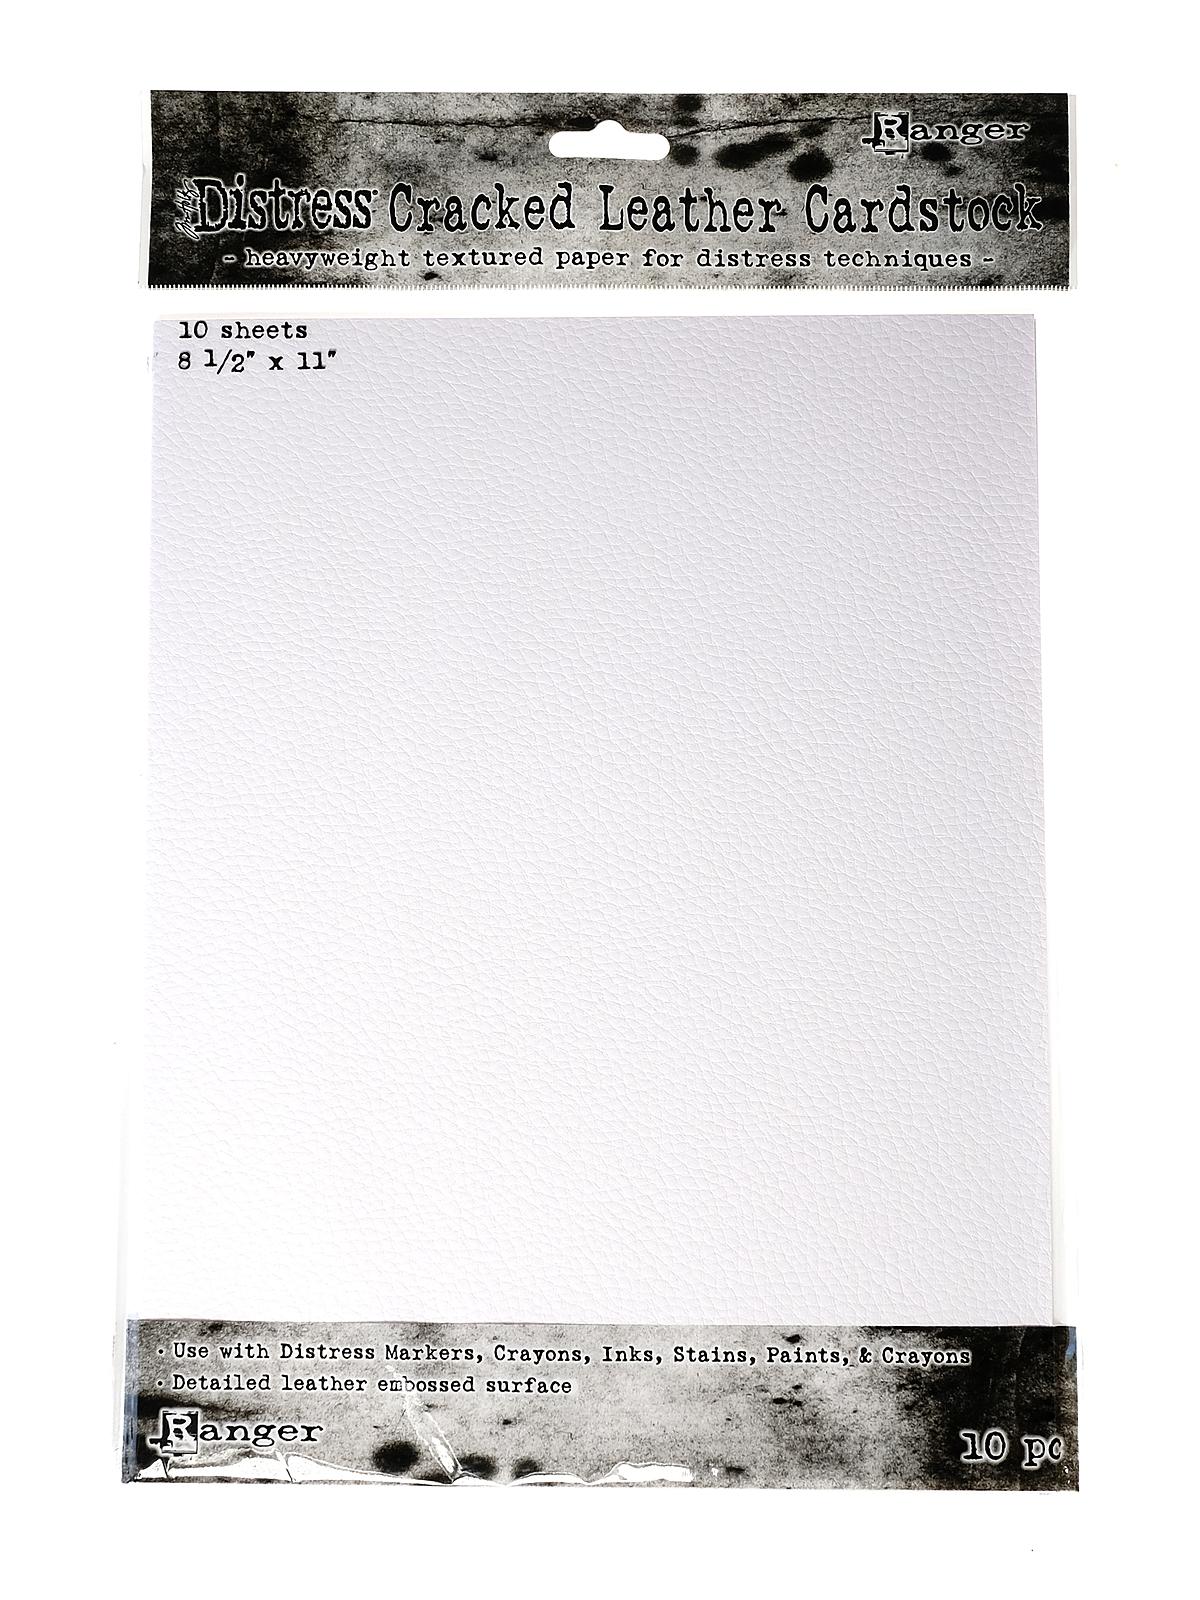 Tim Holtz Distress Cracked Leather Cardstock 8 1 2 In. X 11 In. Pack Of 10